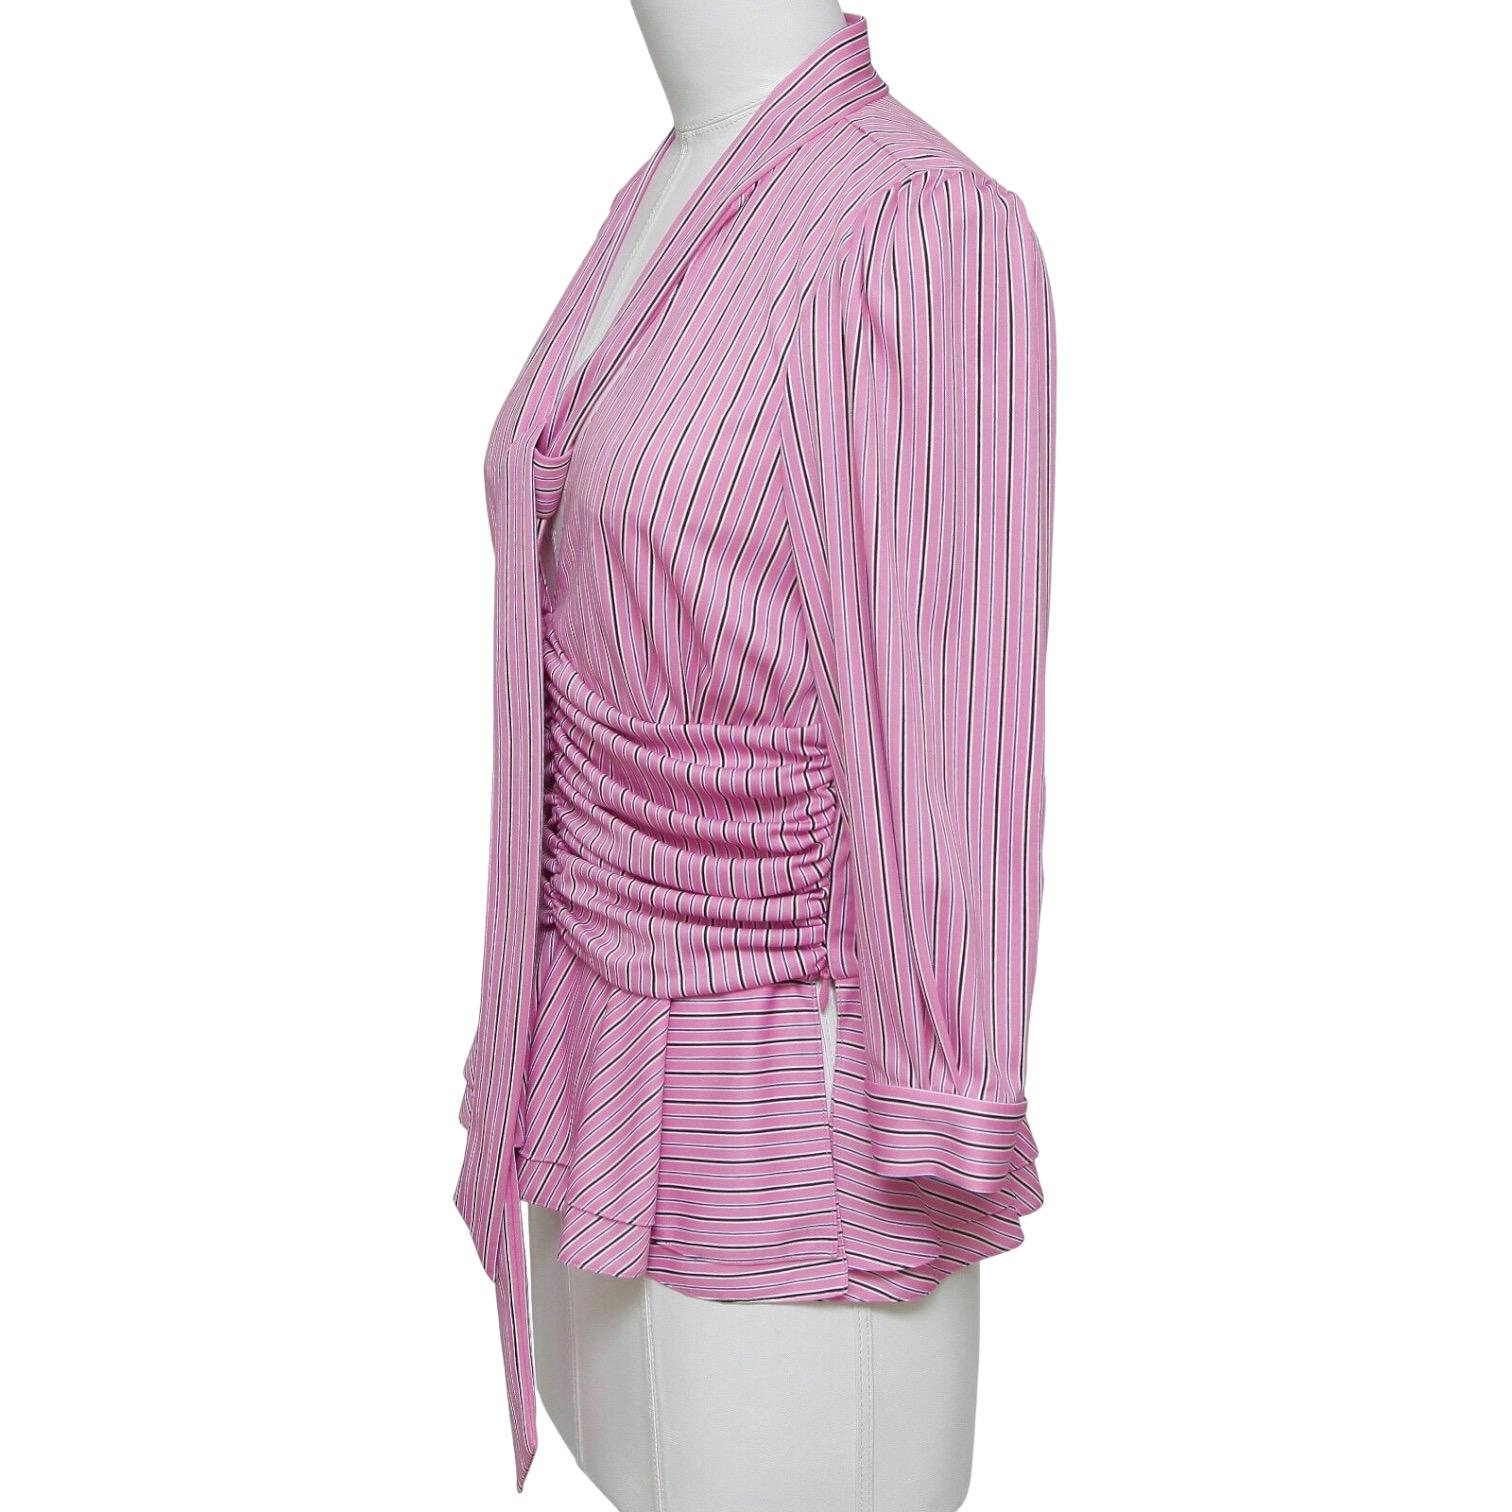 BALENCIAGA Striped Top Shirt Blouse 3/4 Sleeve Neck Tie Rose White Black 38 NWT In New Condition For Sale In Hollywood, FL